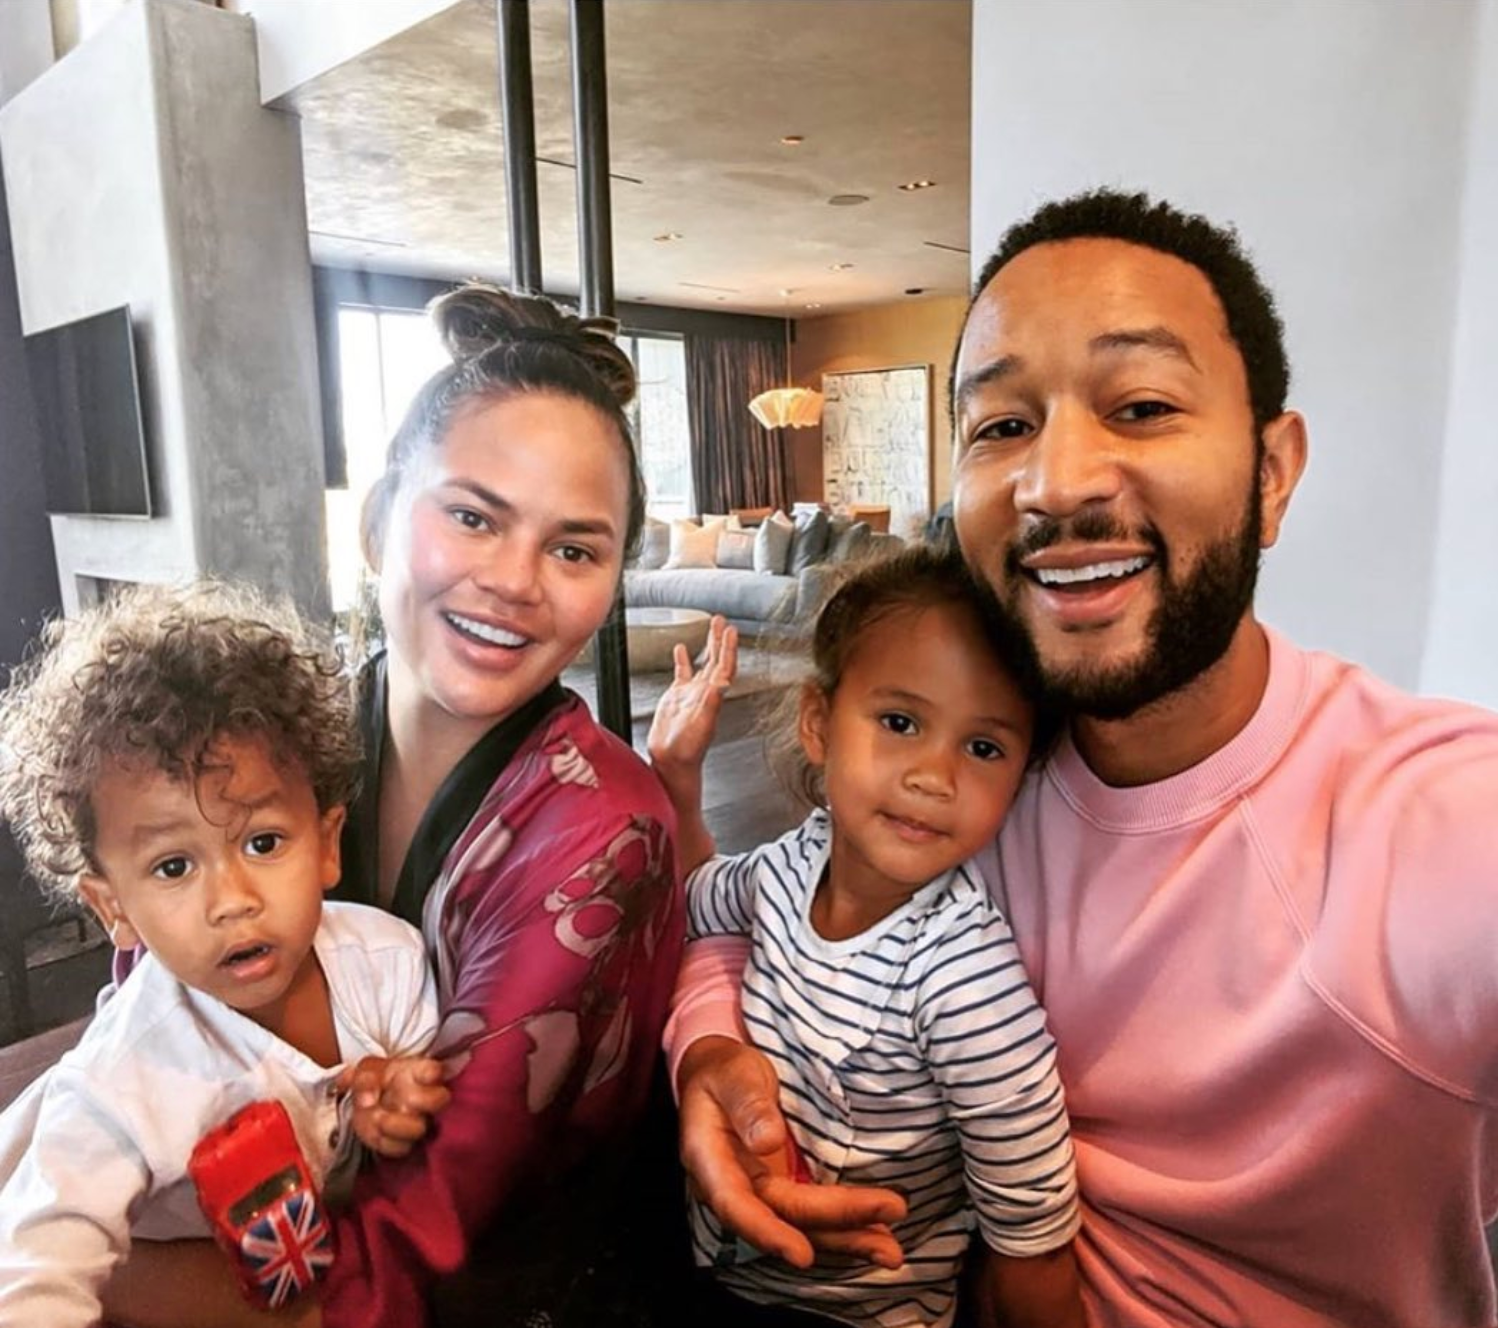 John Legend and Chrissy Teigen Lose Baby After Pregnancy Complications, Post Heartbreaking Goodbye To Son ‘Jack’